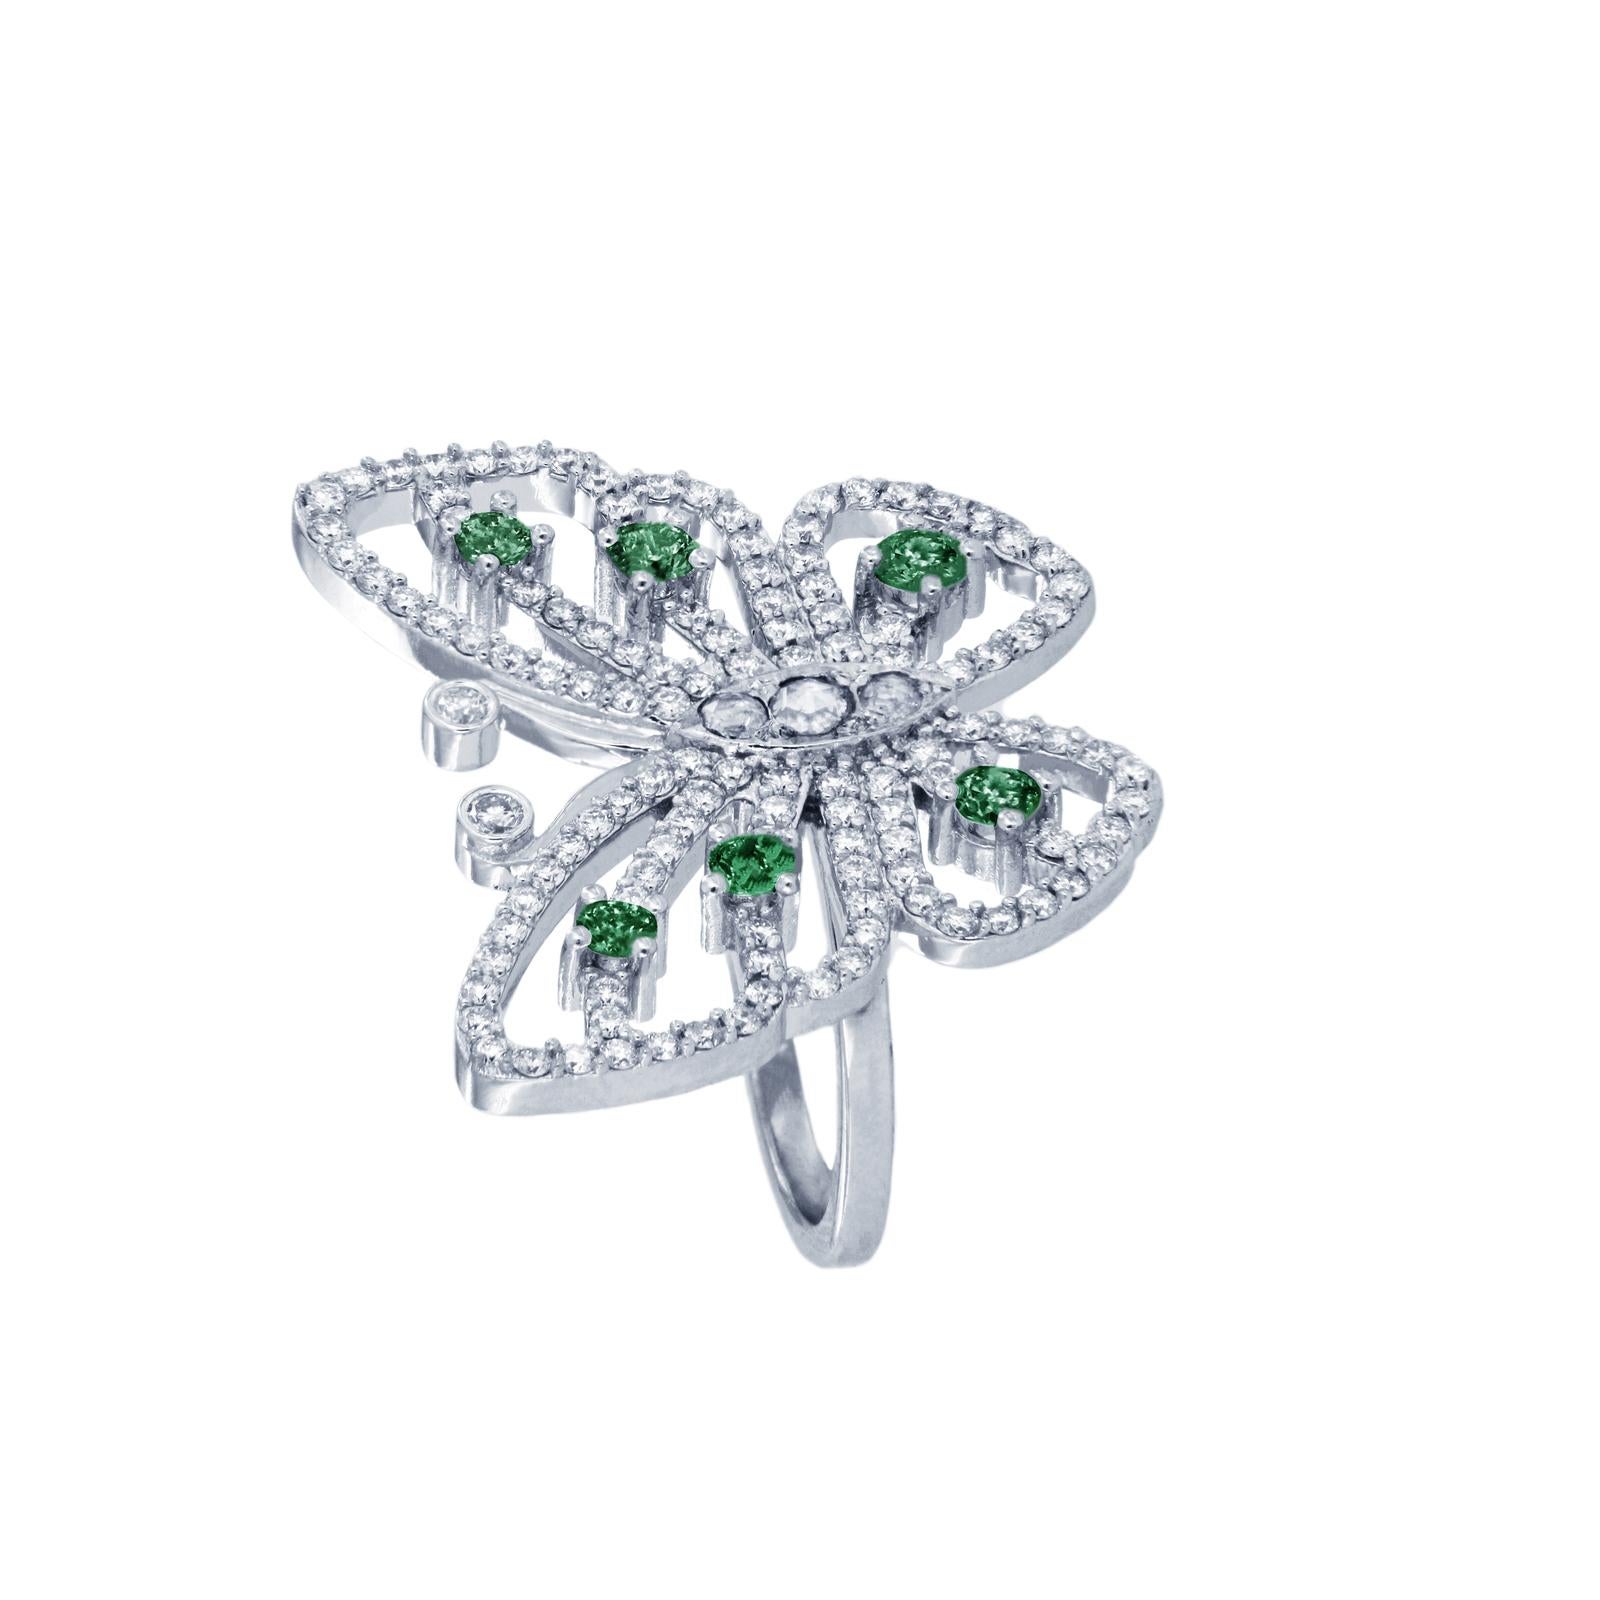 BUTTERFLY DIAMOND EMERALD 14K WHITE GOLD RING 

Custom made
14k White Gold
Butterlfy dimension: 0.9x1”
Ring size: 8
Weight: 9gr
Diamond: 1.2ct, VS clarity, G color
Emerald: 0.6ct
*Available in any size, please inquire.

Original Retail: $5,900